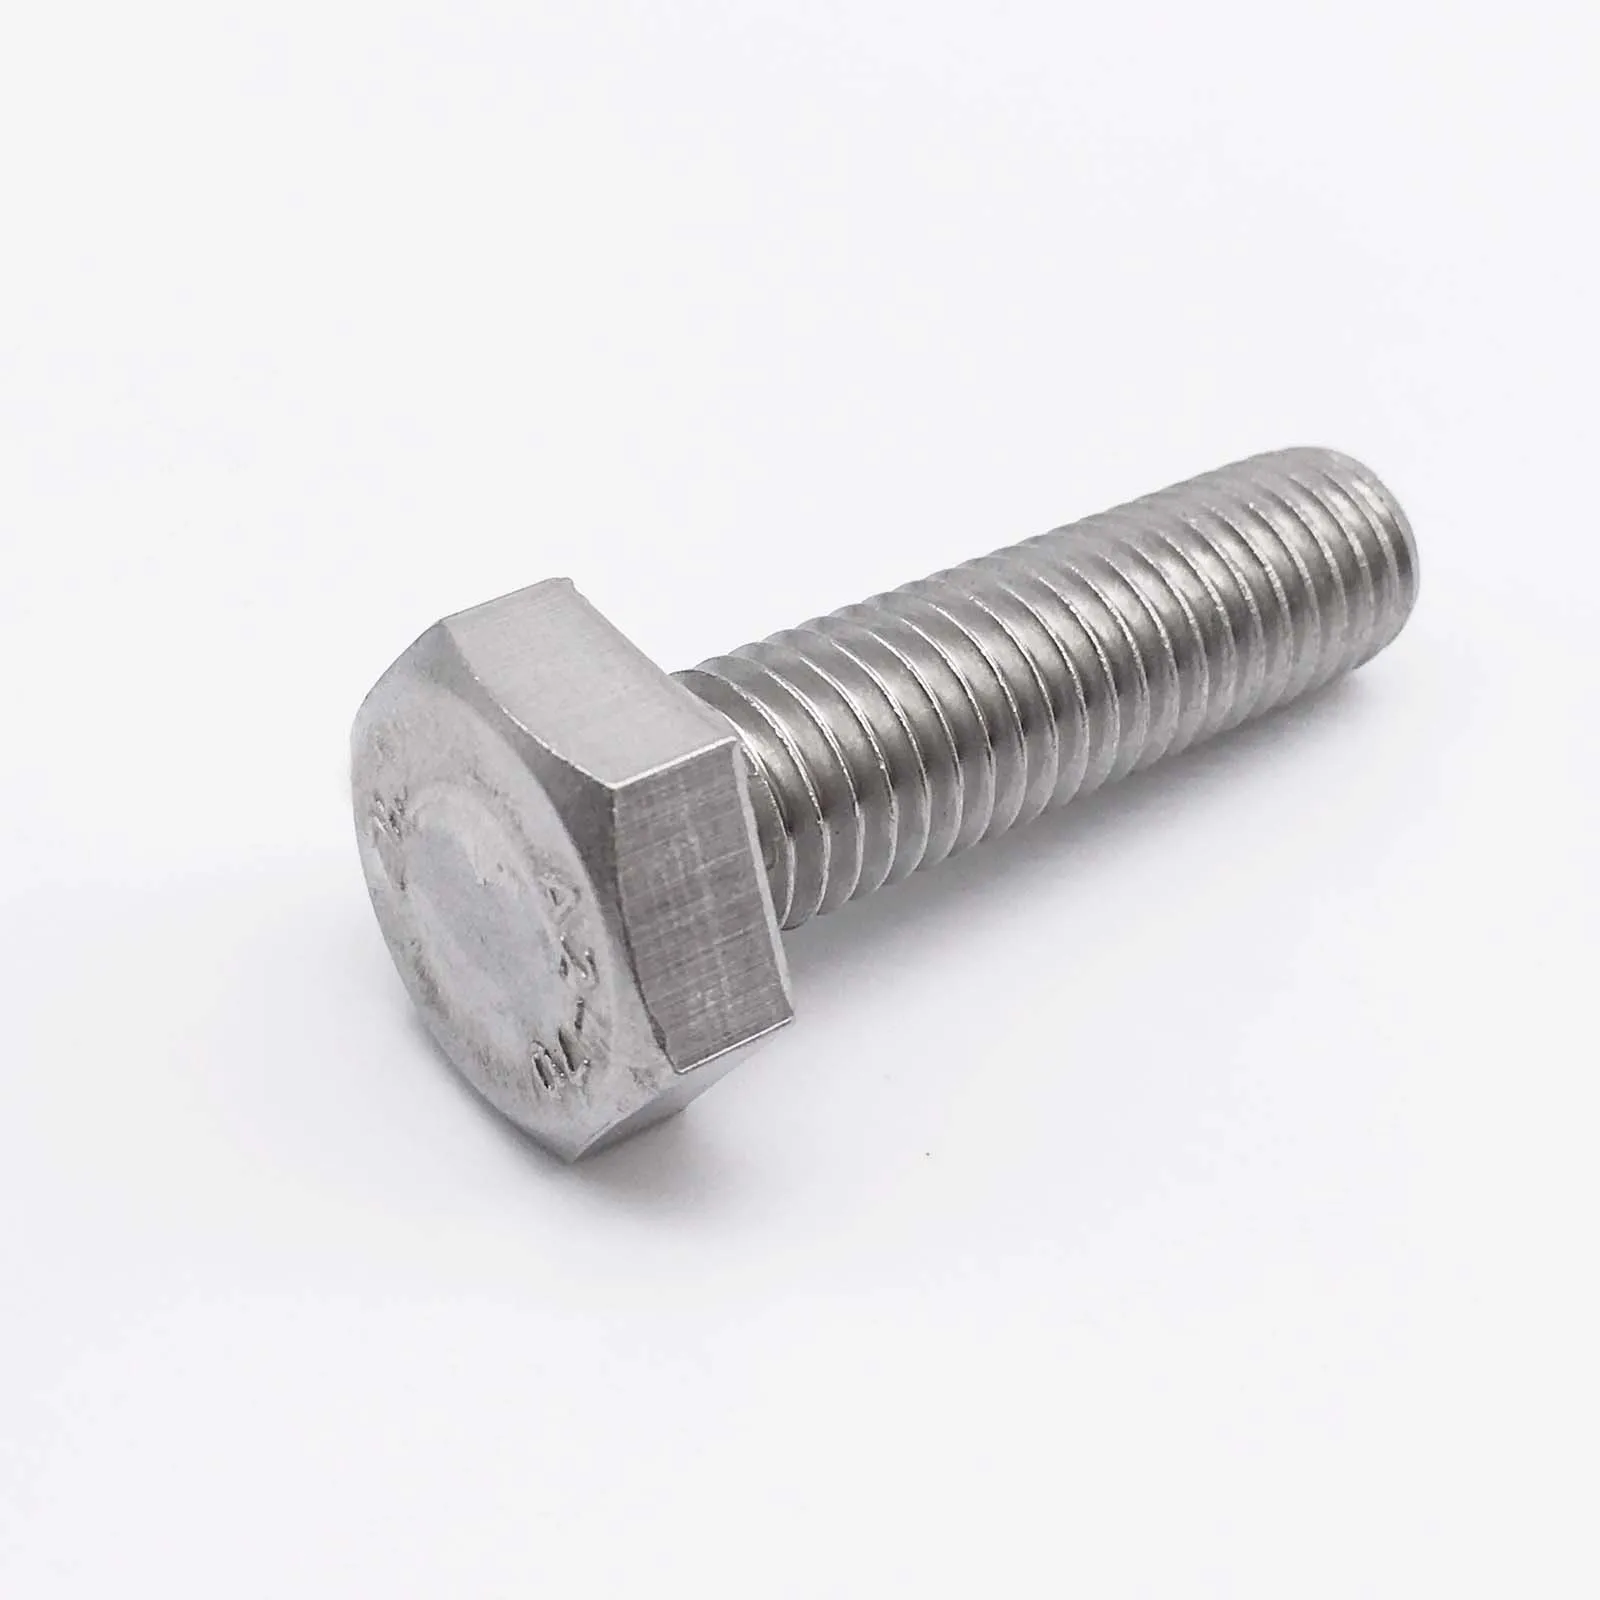 M4 M5 M6 M8 A2 STAINLESS HEX HEAD SET SCREWS FULLY THREADED HEXAGON BOLTS DIN933 